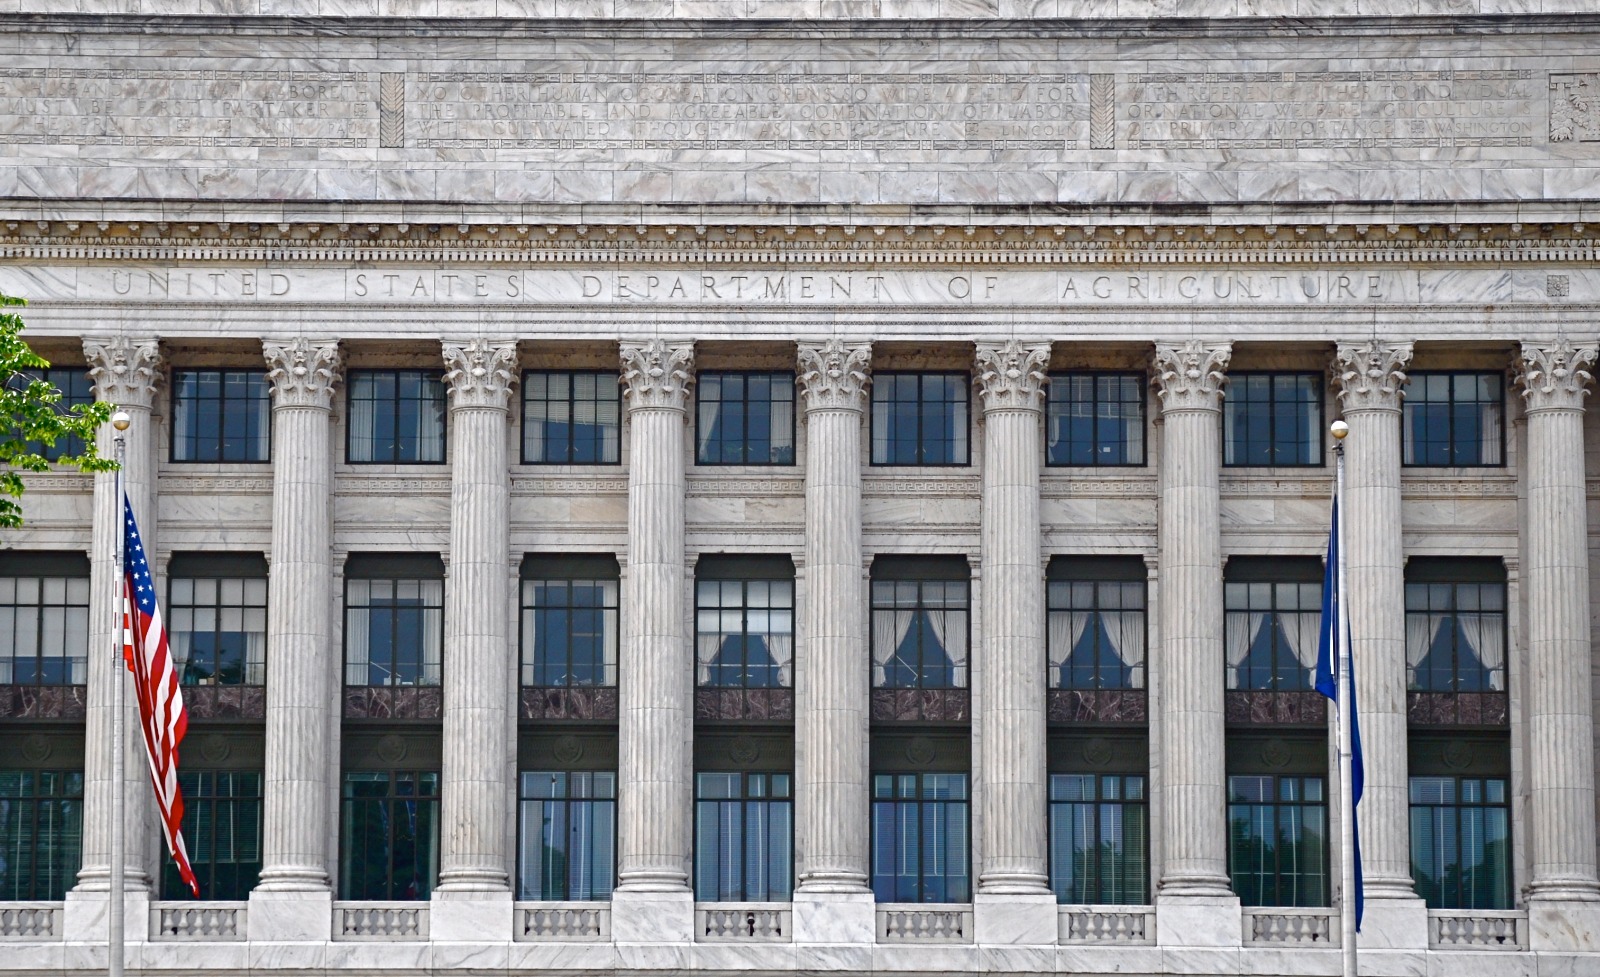 Facade of the U.S. Department of Agriculture